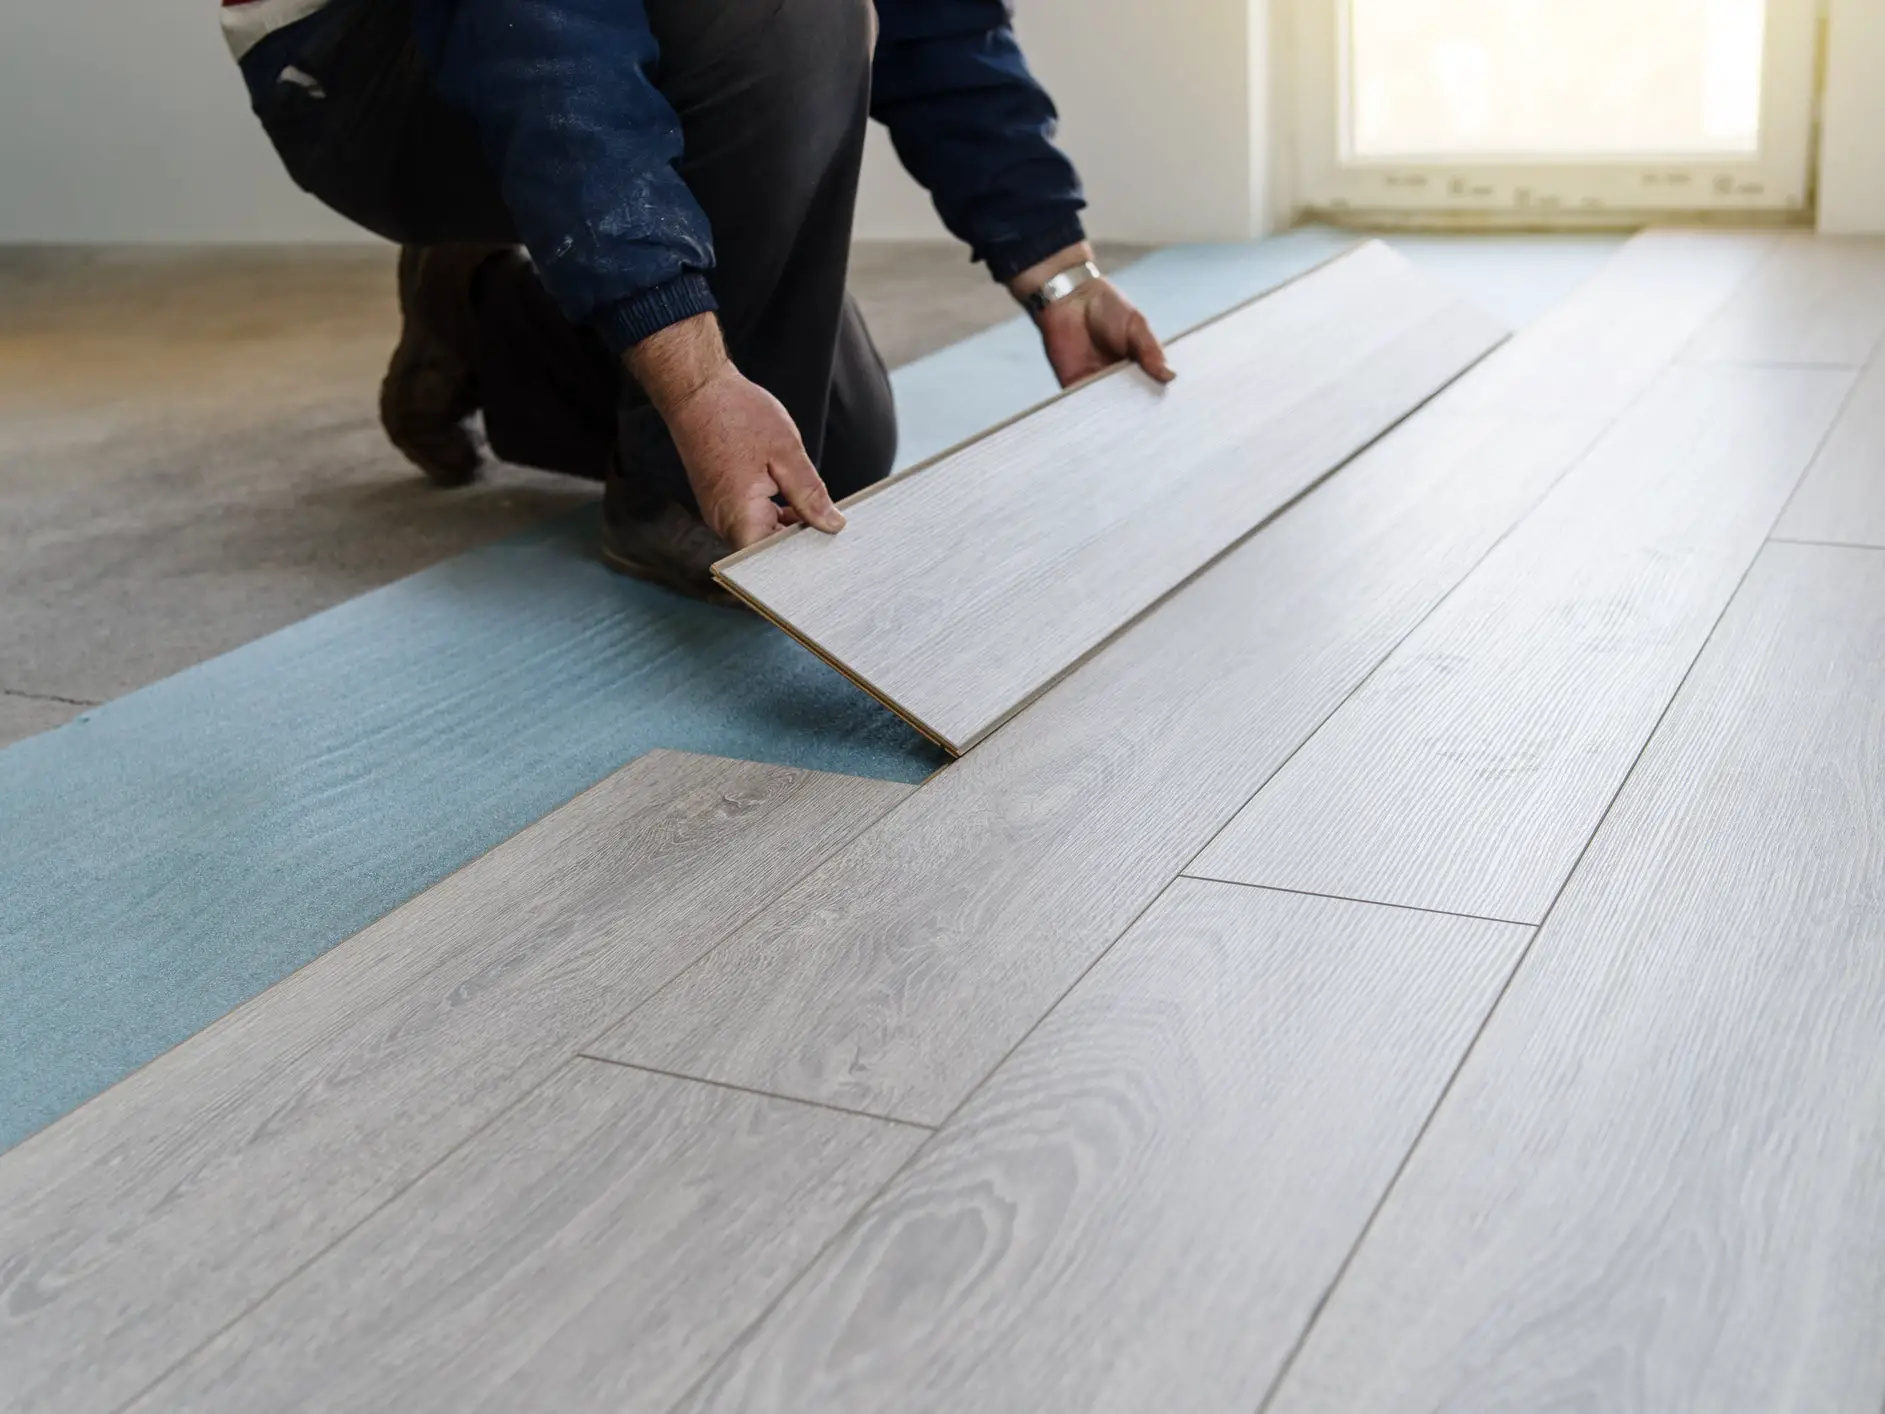 How To Install Temporary Flooring Over, Can We Put Laminate Flooring Over Carpet